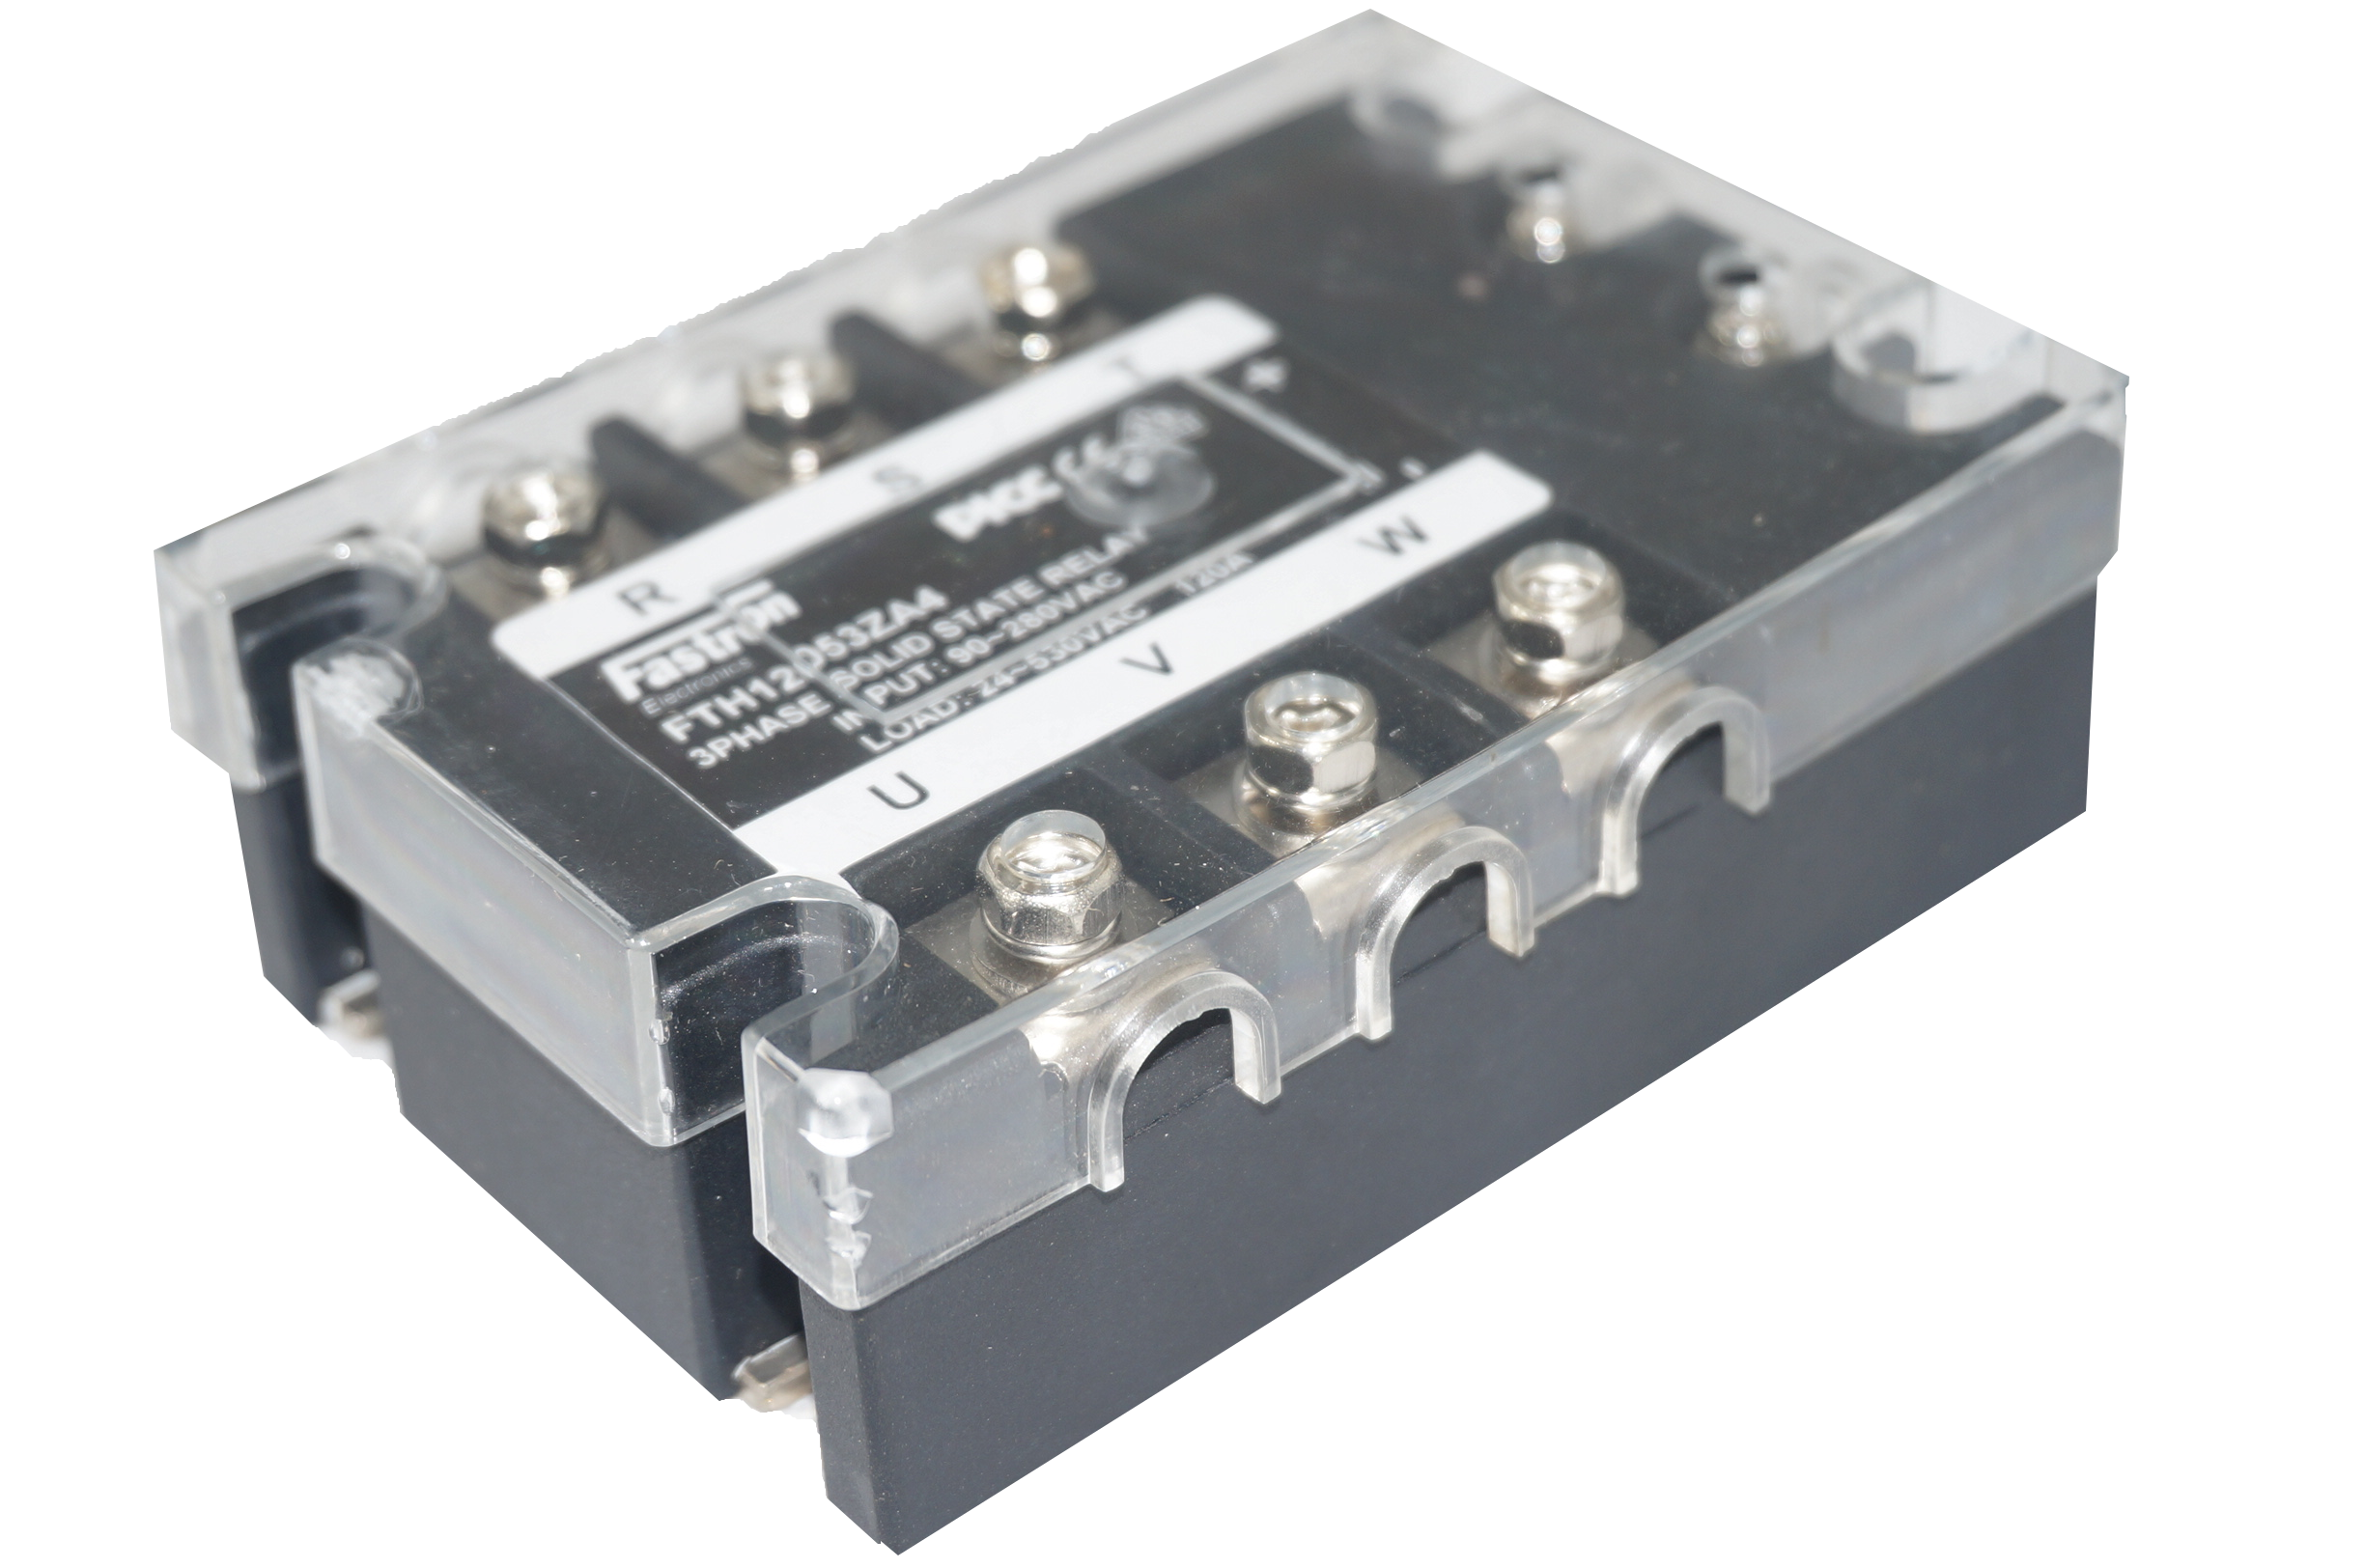 FTH12053ZD3, Solid State Relay, 3 Phase 4-32VDC Control, 120A, 70-530VAC Load, with IP20 Cover